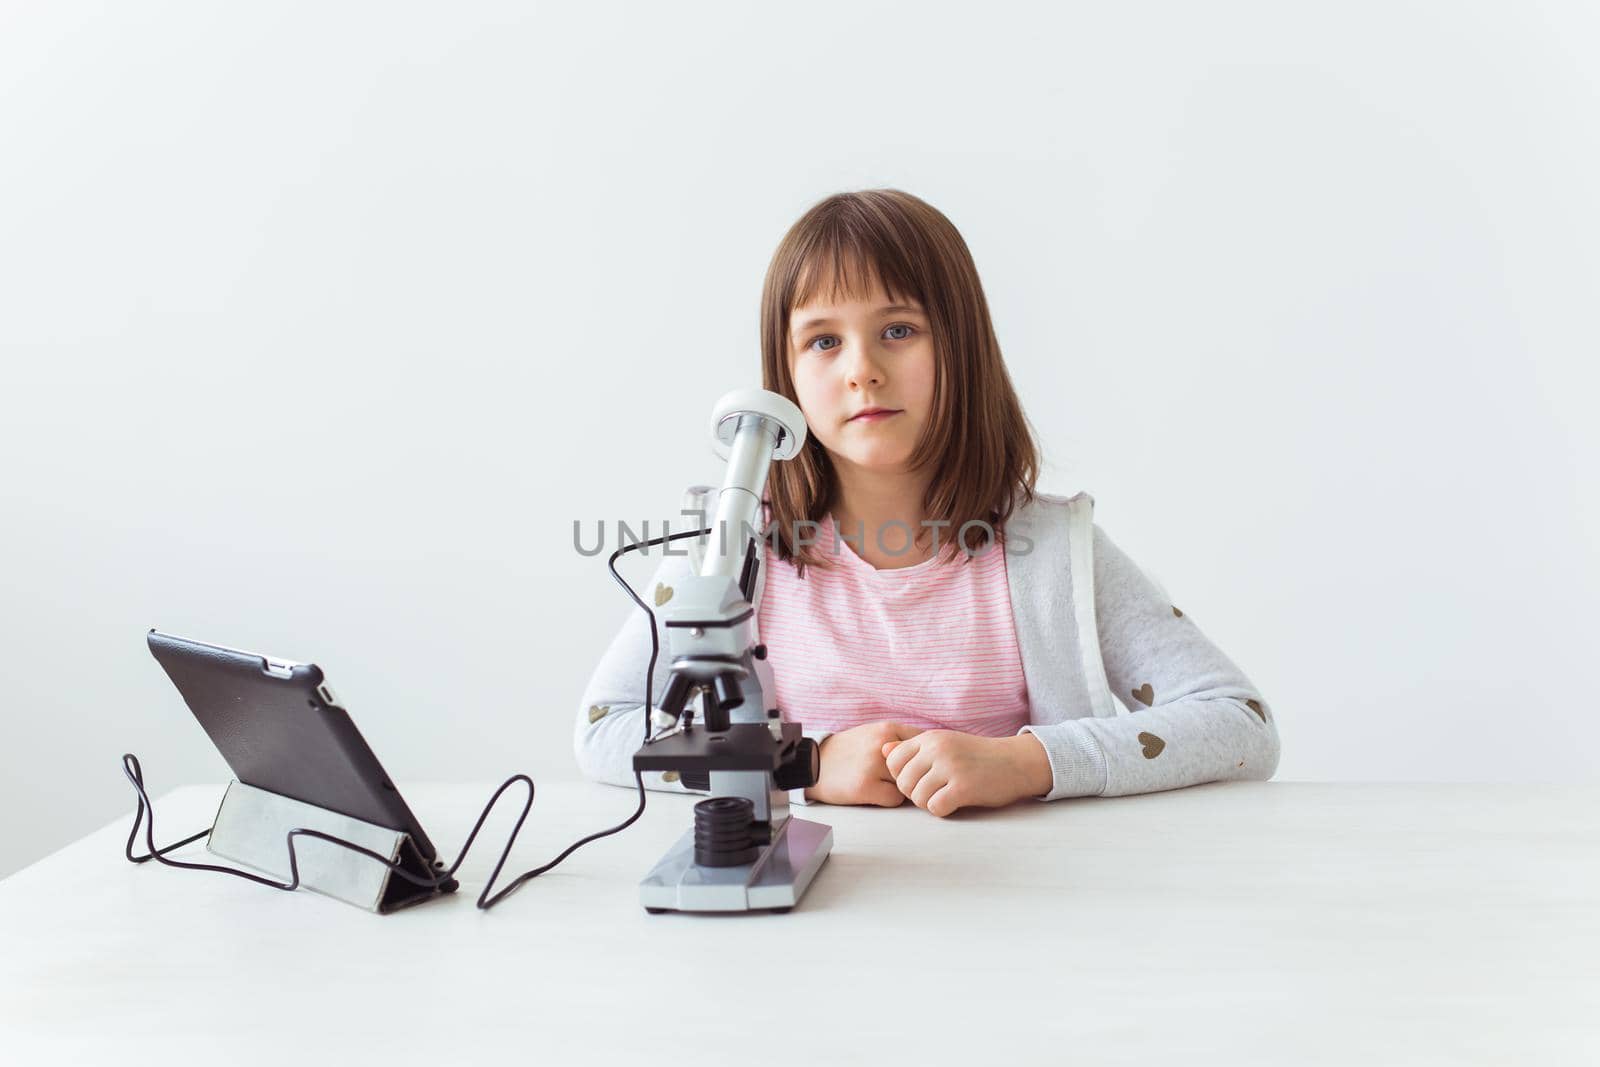 Child girl in science class using digital microscope. Technologies, children and learning concept. by Satura86